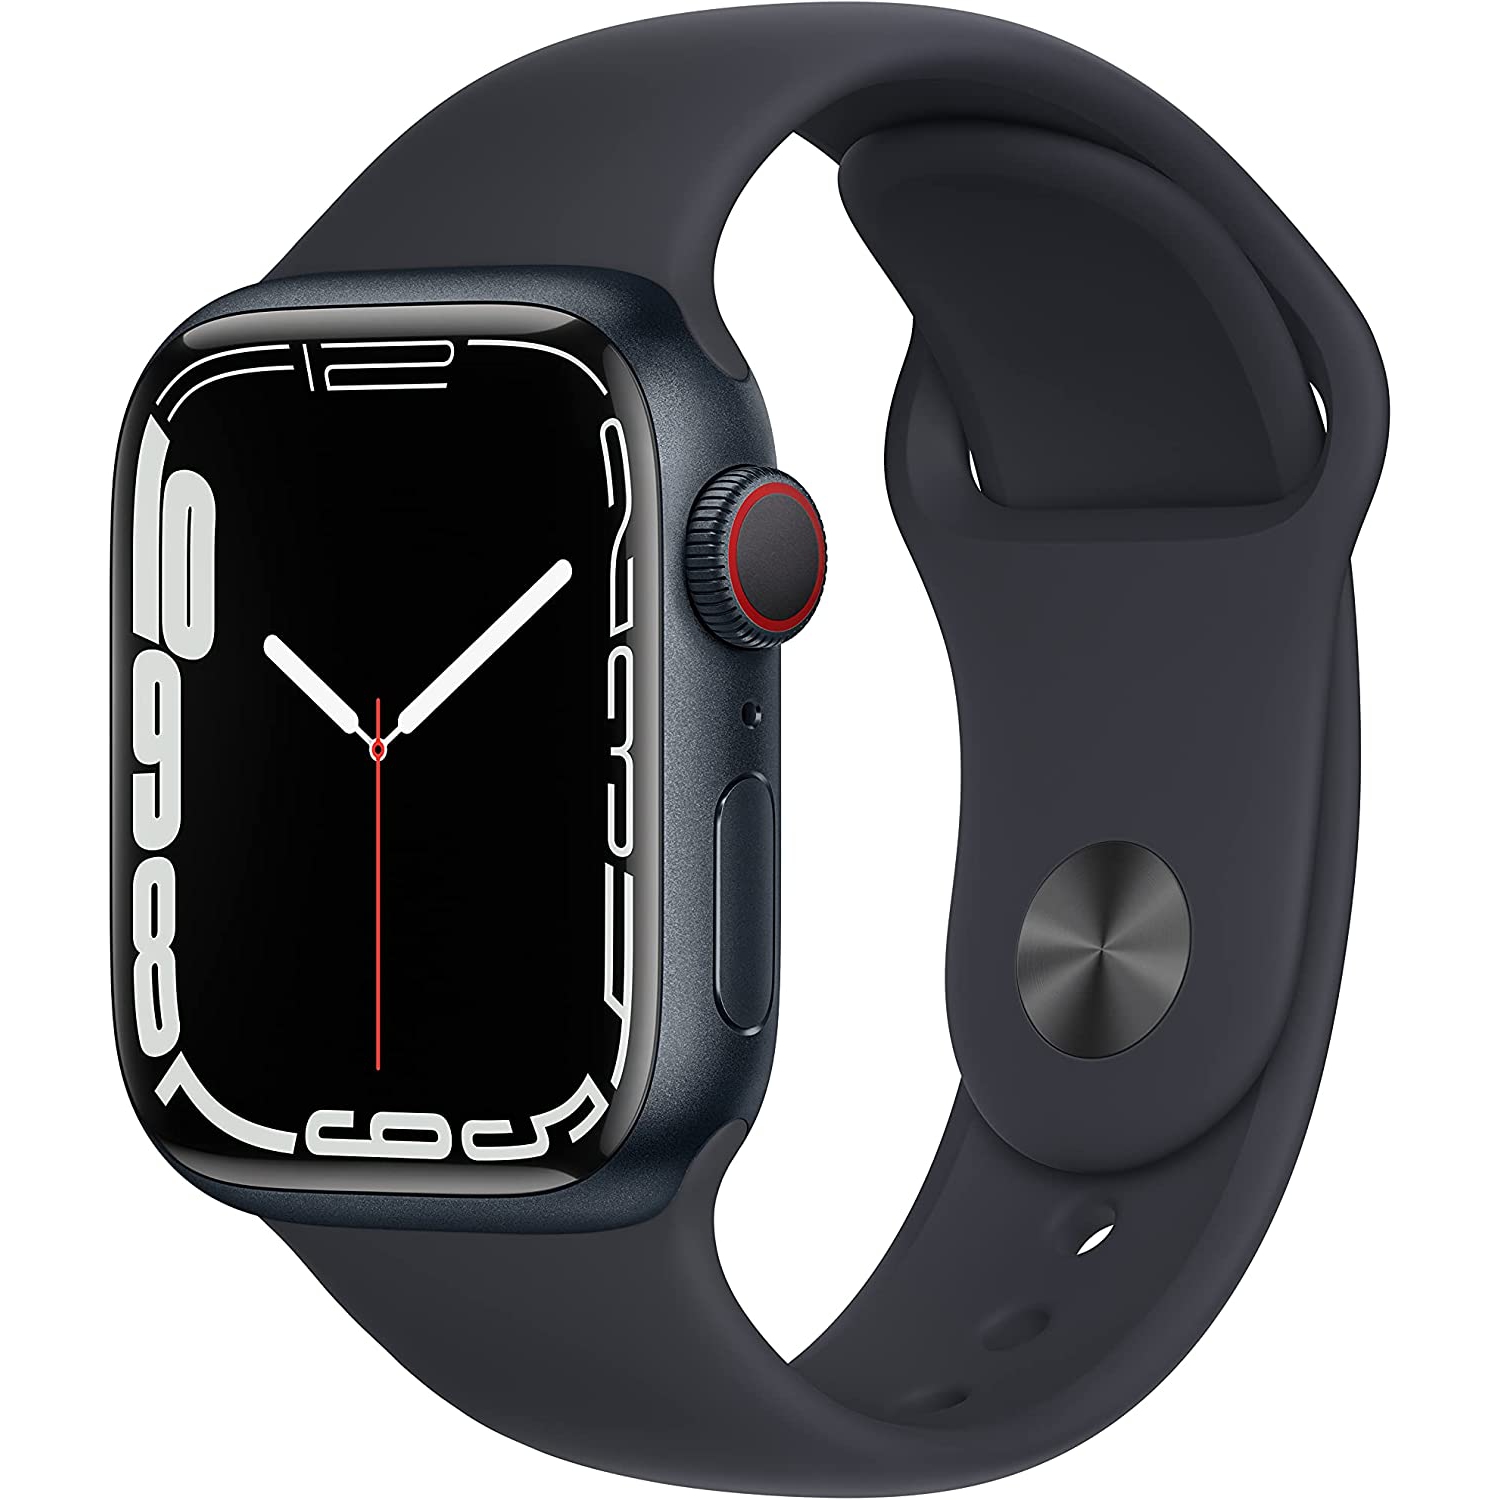 Refurbished (Good) Apple Watch Series 7 (GPS + Cellular 4G LTE, 45mm) - Midnight Aluminum Case with Midnight Sport Band